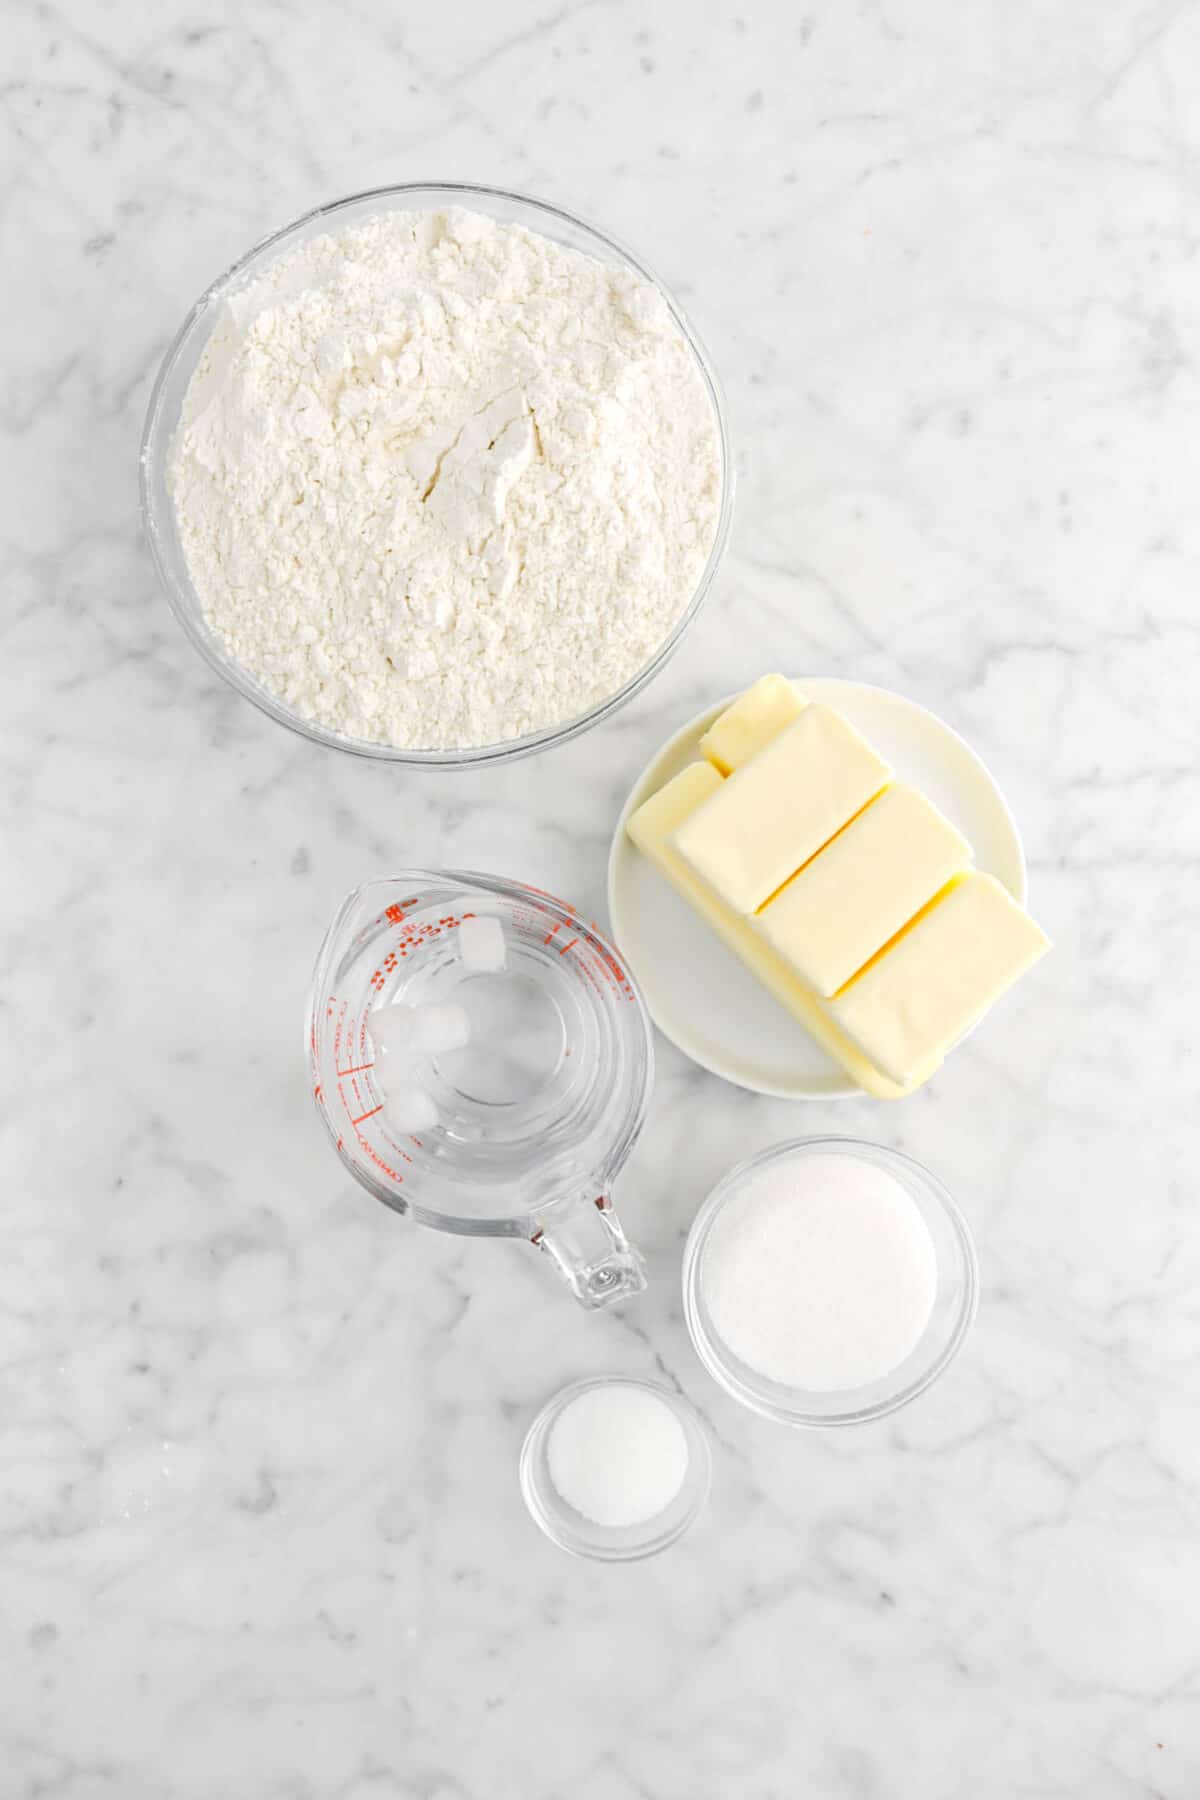 flour, butter, ice water, sugar, and salt on marble counter